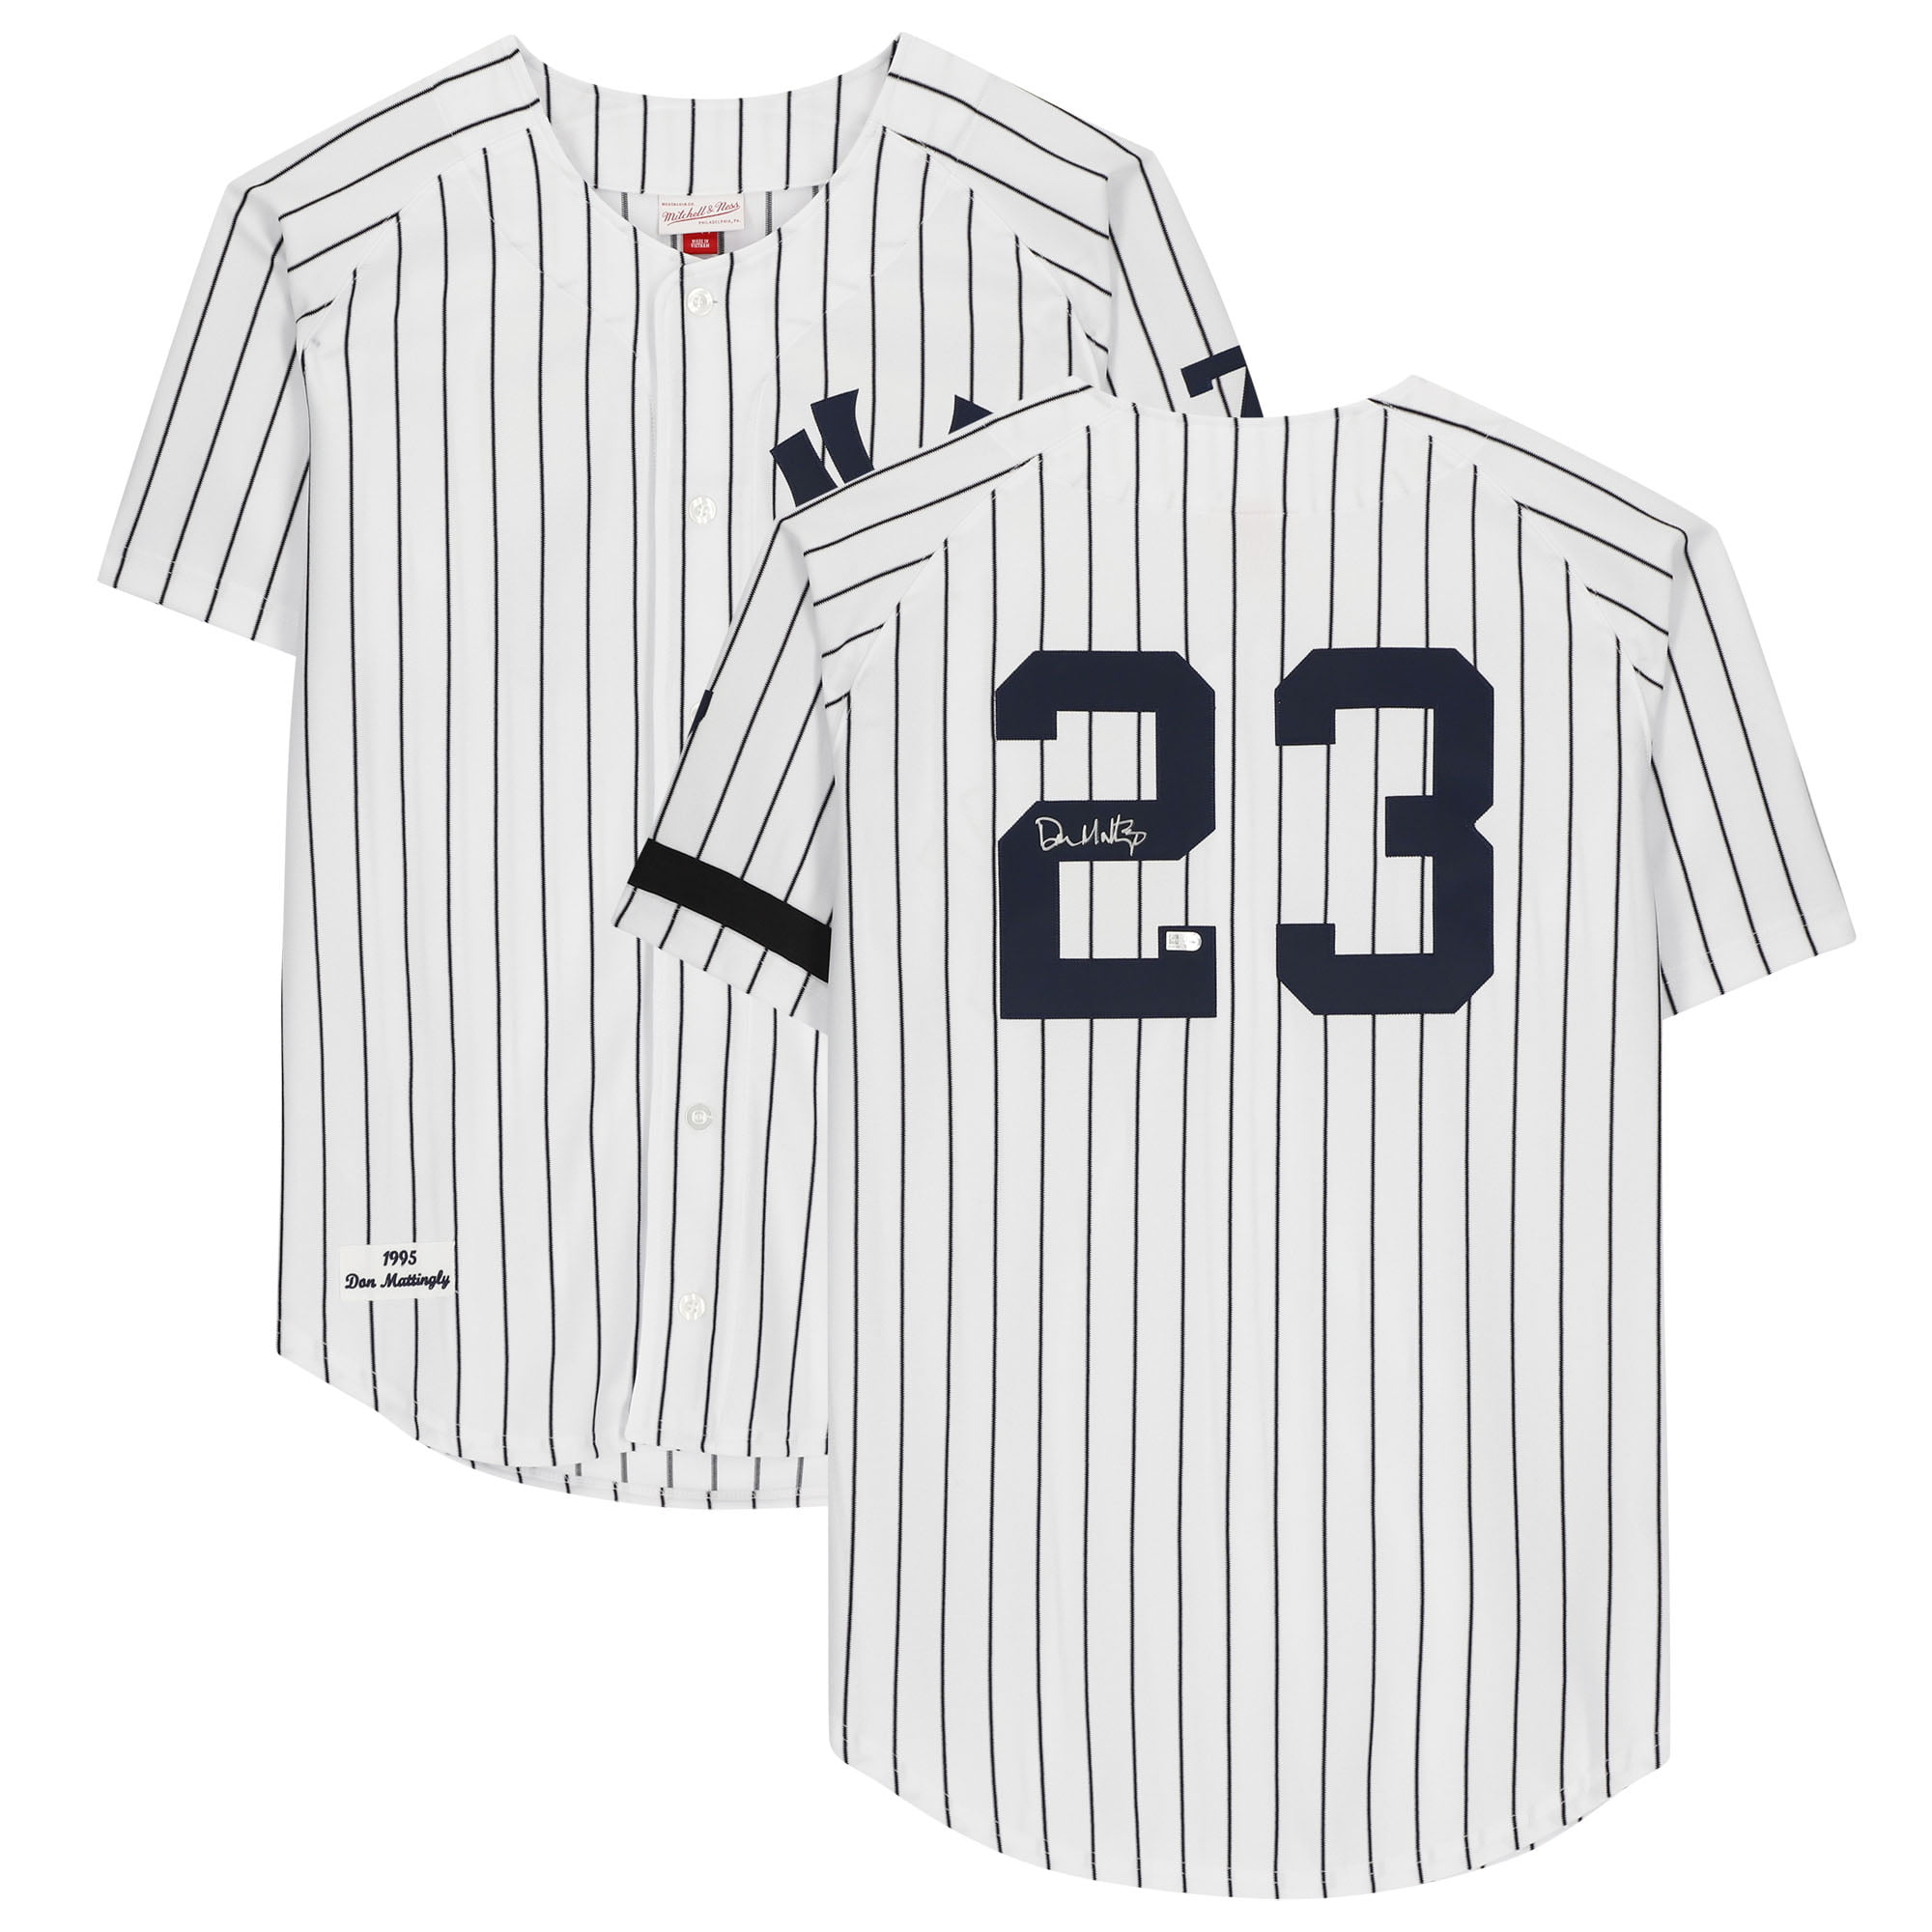 Don Mattingly New York Yankees Autographed White Mitchell & Ness  Cooperstown Collection Pinstripe Jersey 